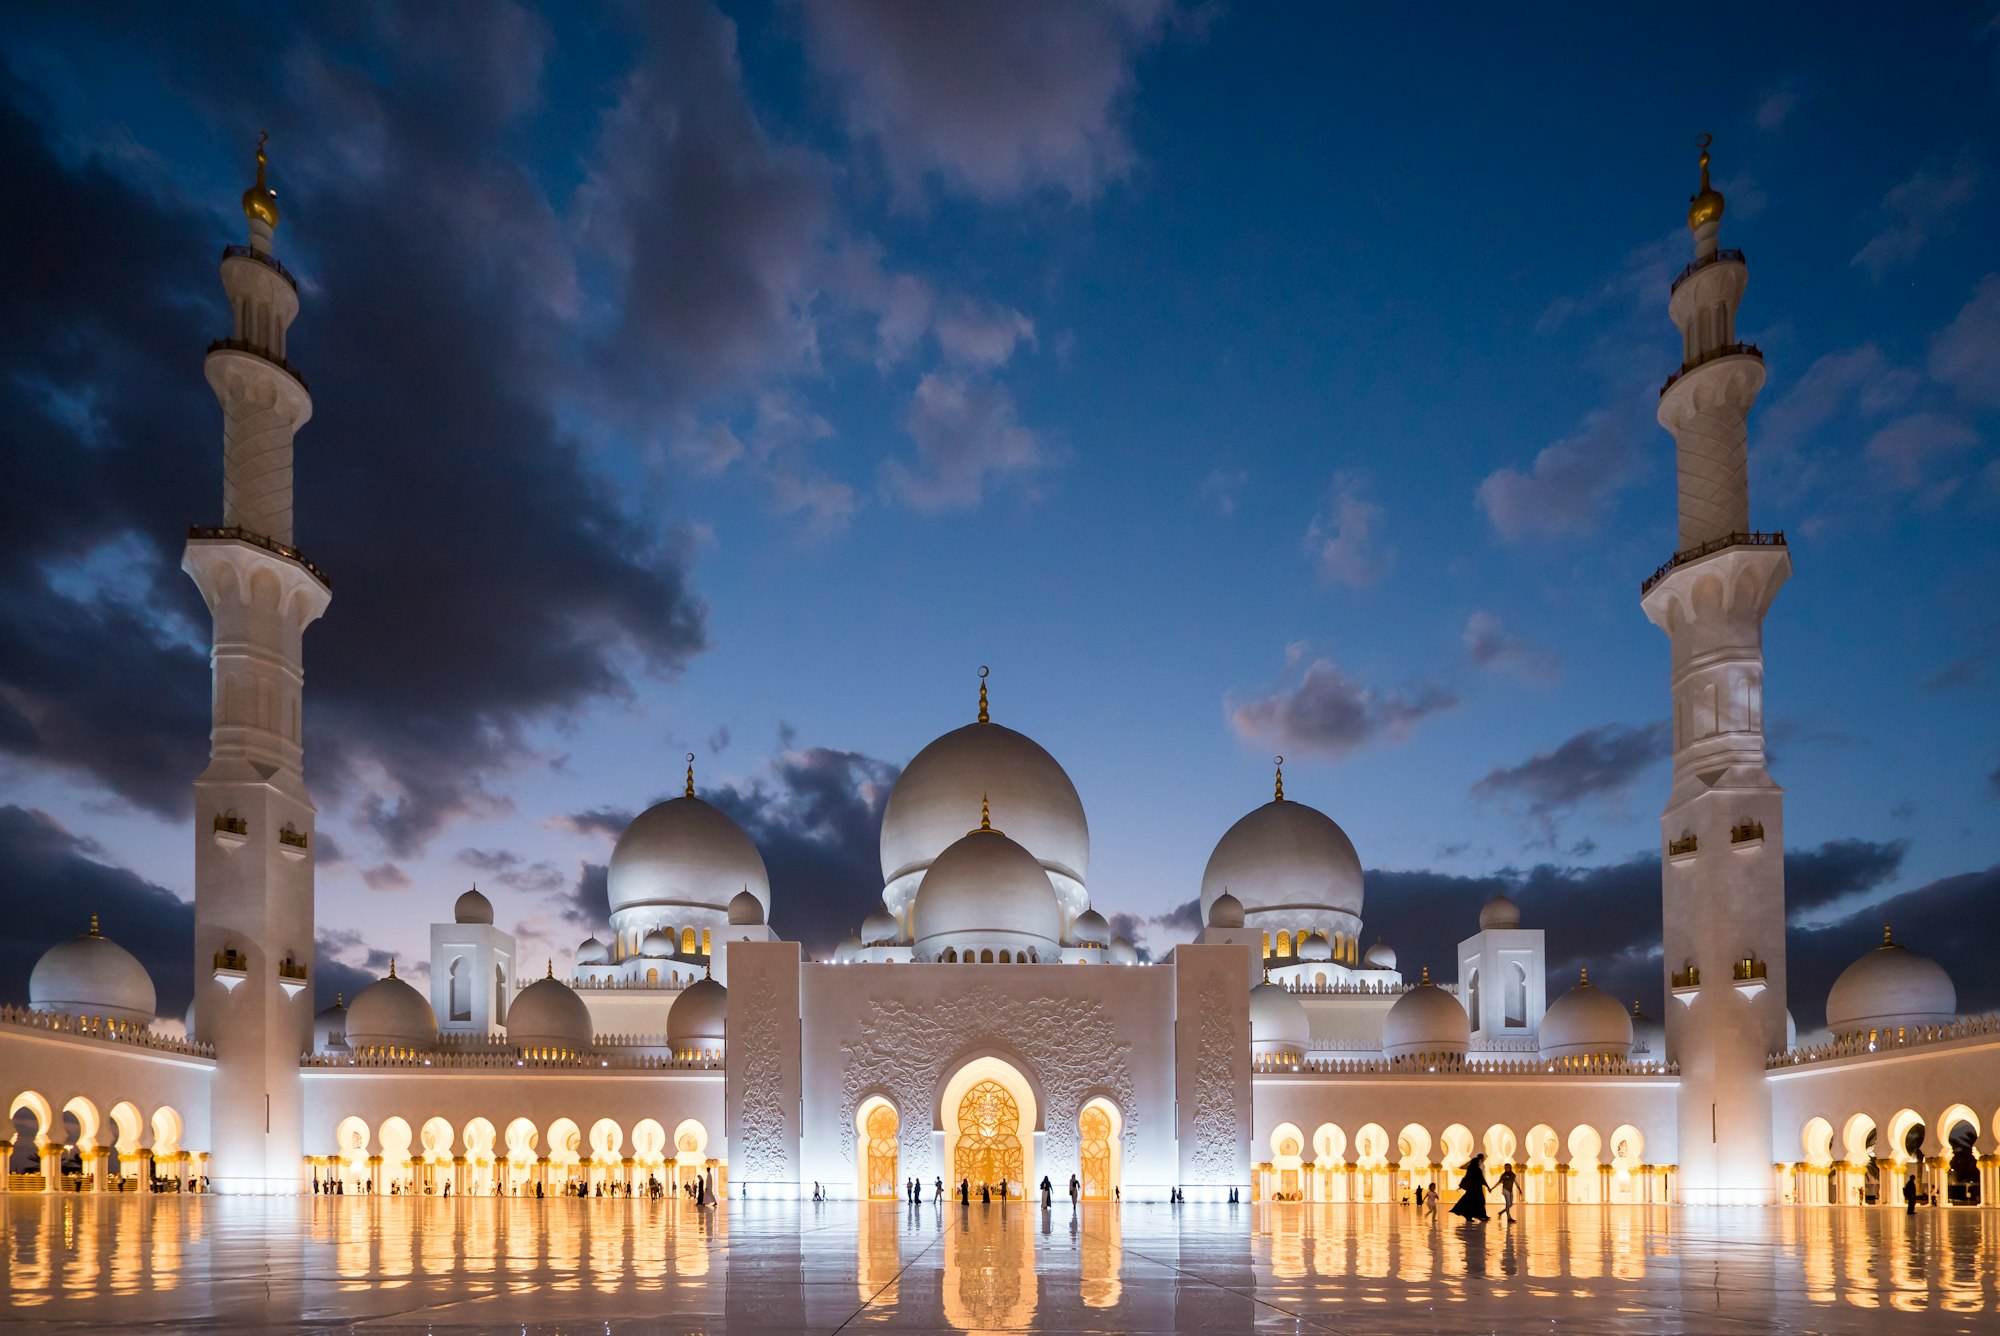 Looking for exciting things to do in Abu Dhabi?